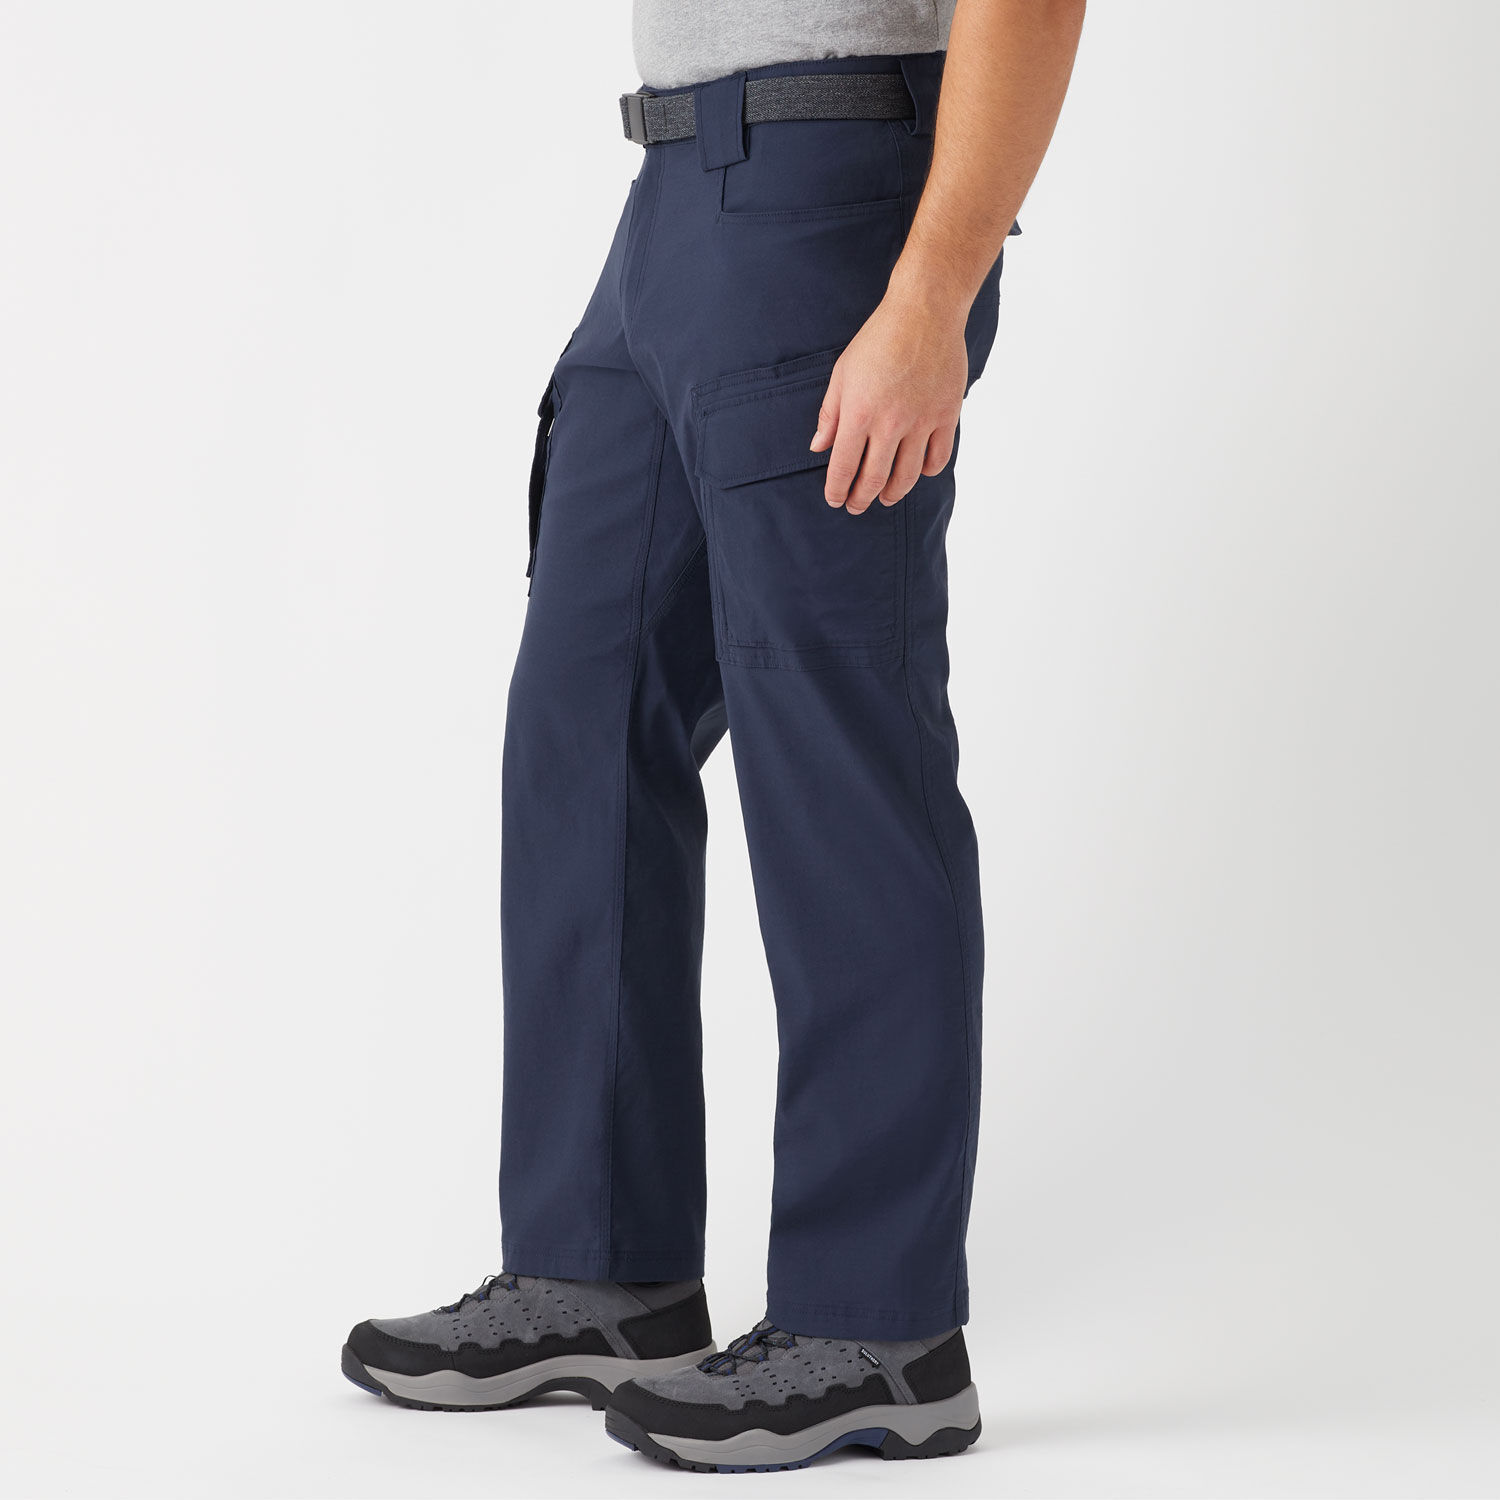 Duluth Trading Fire Hose Work Pants  Chasing The Best Work Wear  YouTube